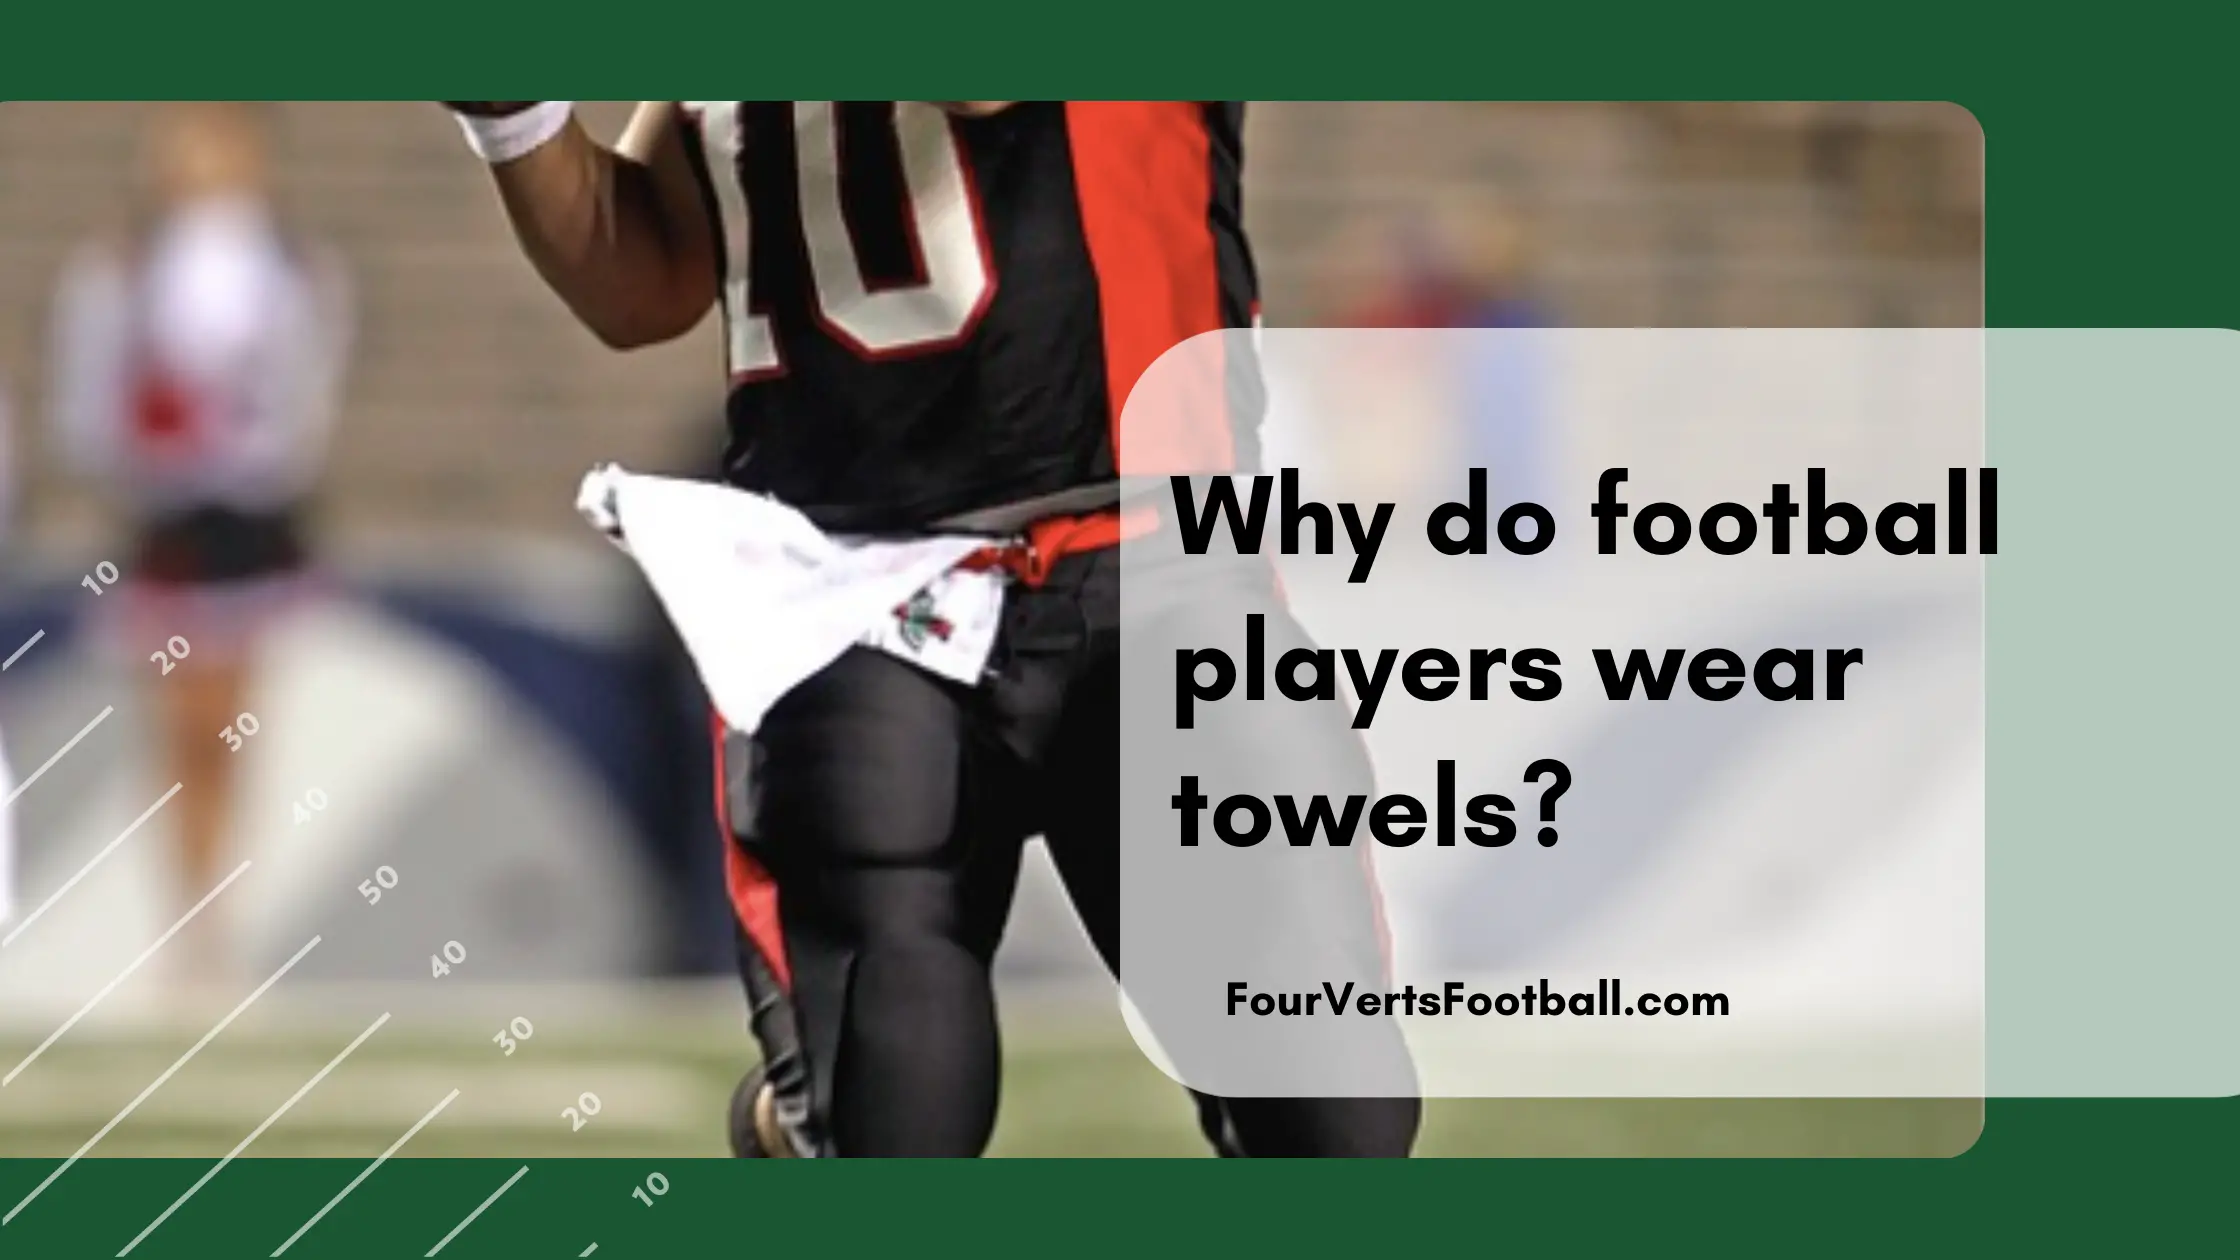 Why do football players wear towels